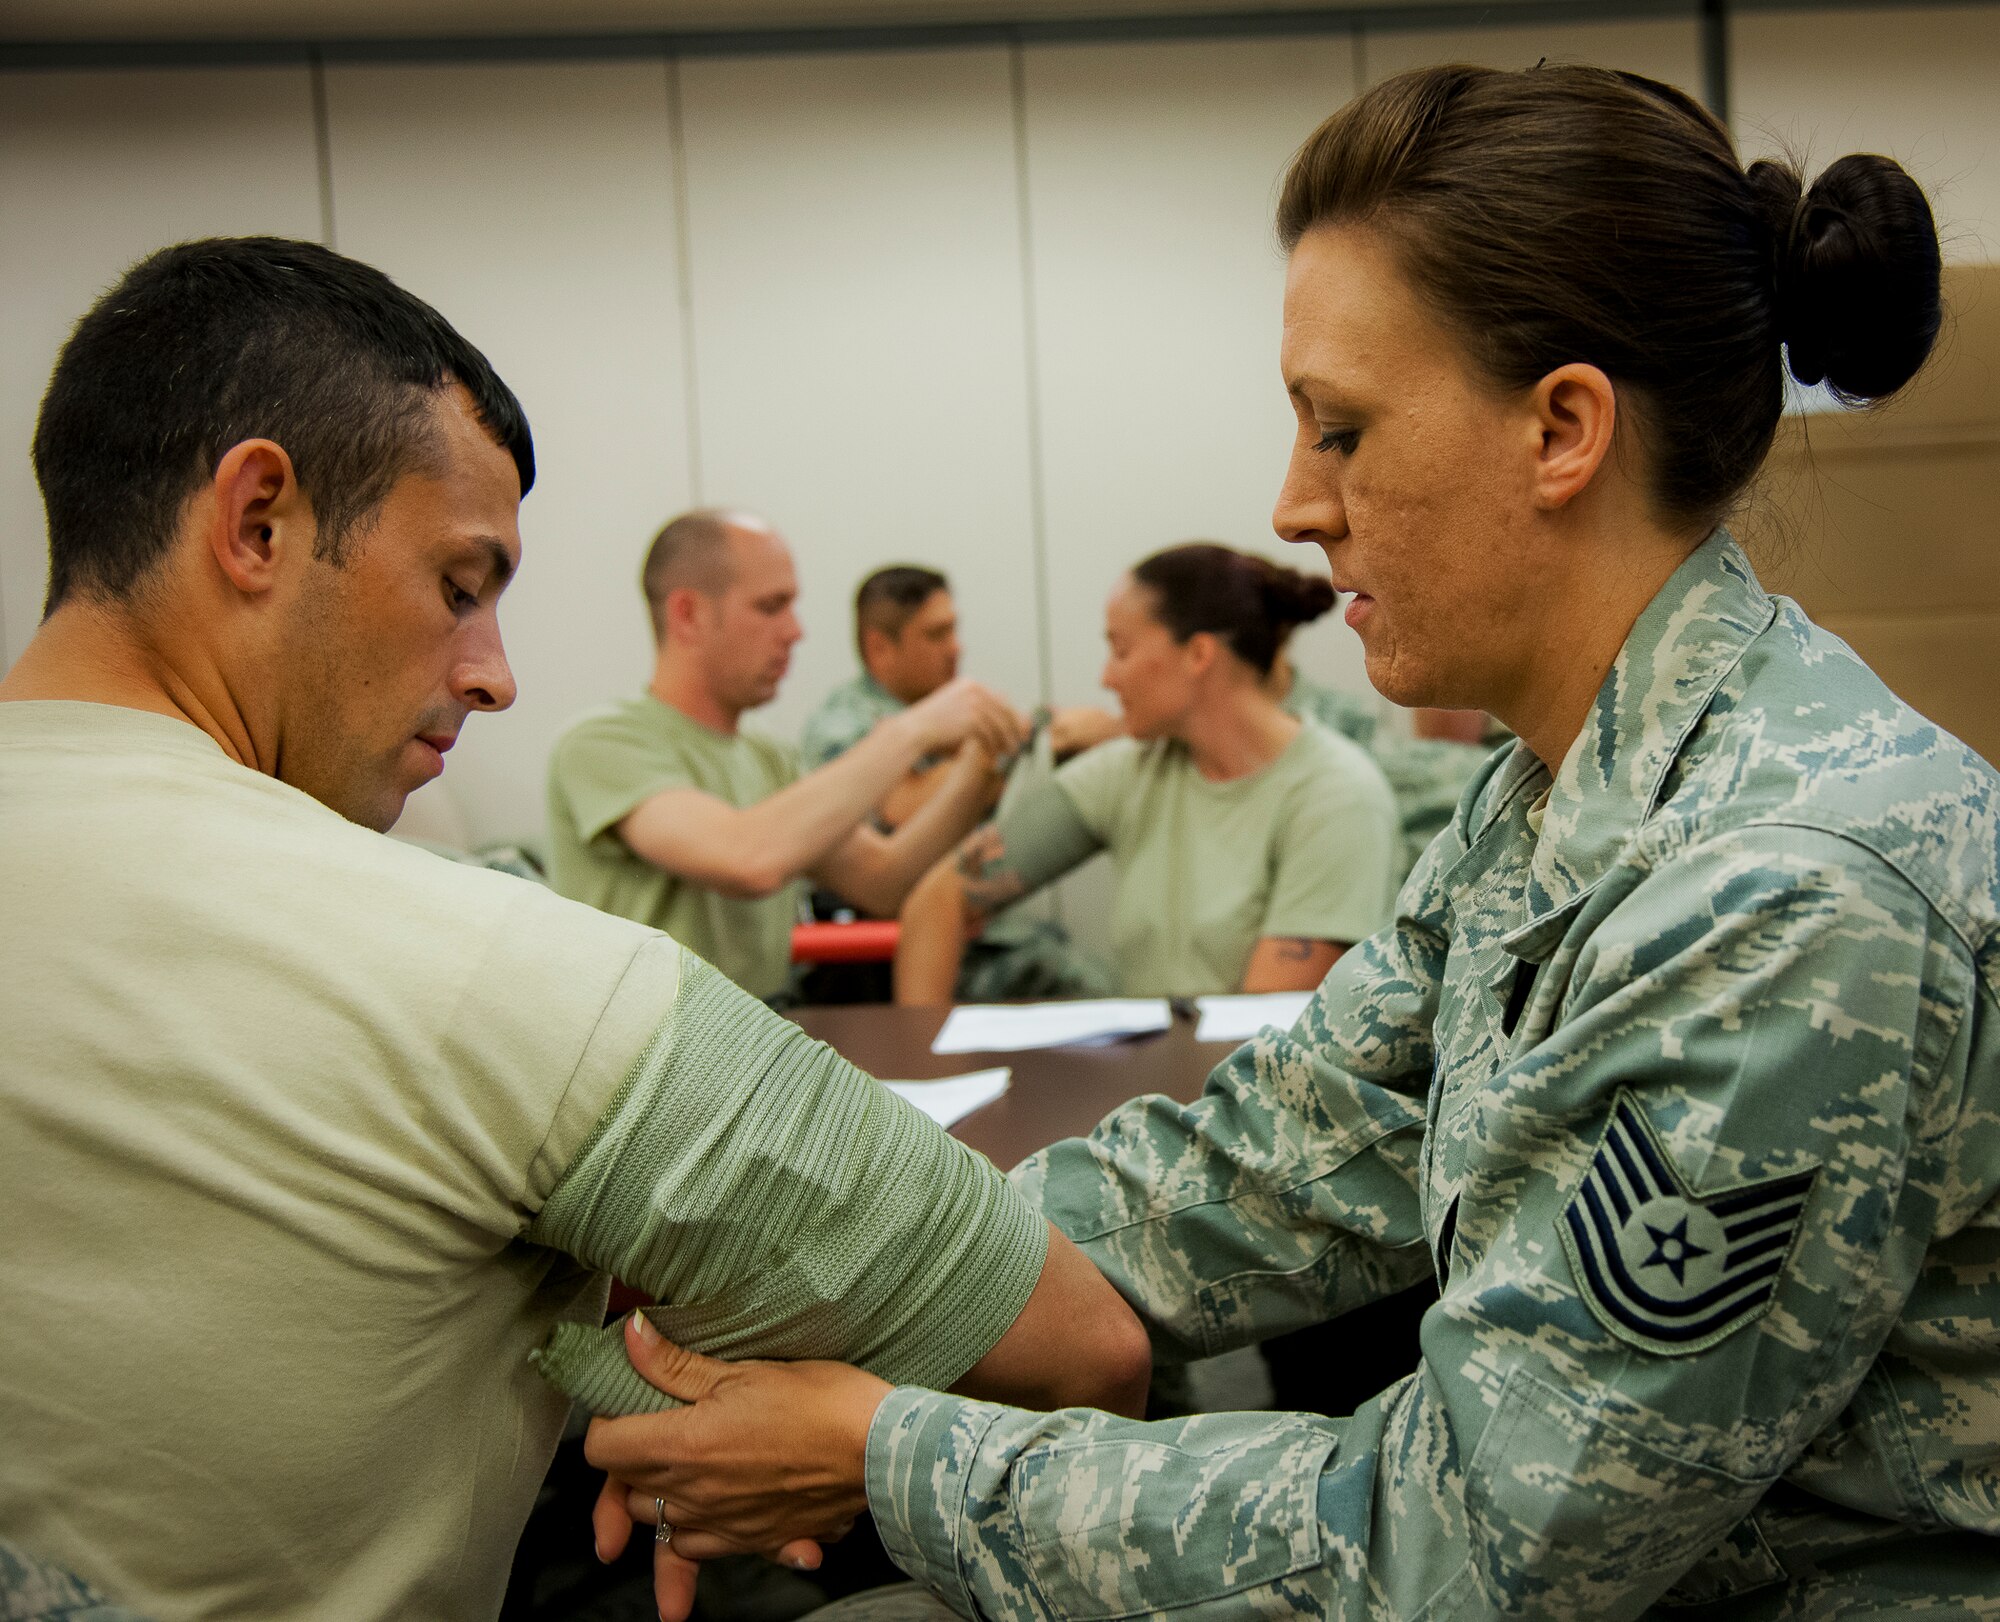 Tech. Sgt. Kelsey Woodhouse, from the 919th Special Operations Logistics Readiness Squadron, applies a combat bandage to Staff Sgt. Ryan Santini during a Self-Aid and Buddy Care instructor course at Duke Field April 4.  The course was offered during the 919th’s annual four-day Super UTA that focuses heavily on ancillary training.  (U.S. Air Force photo/Tech. Sgt. Samuel King Jr.)